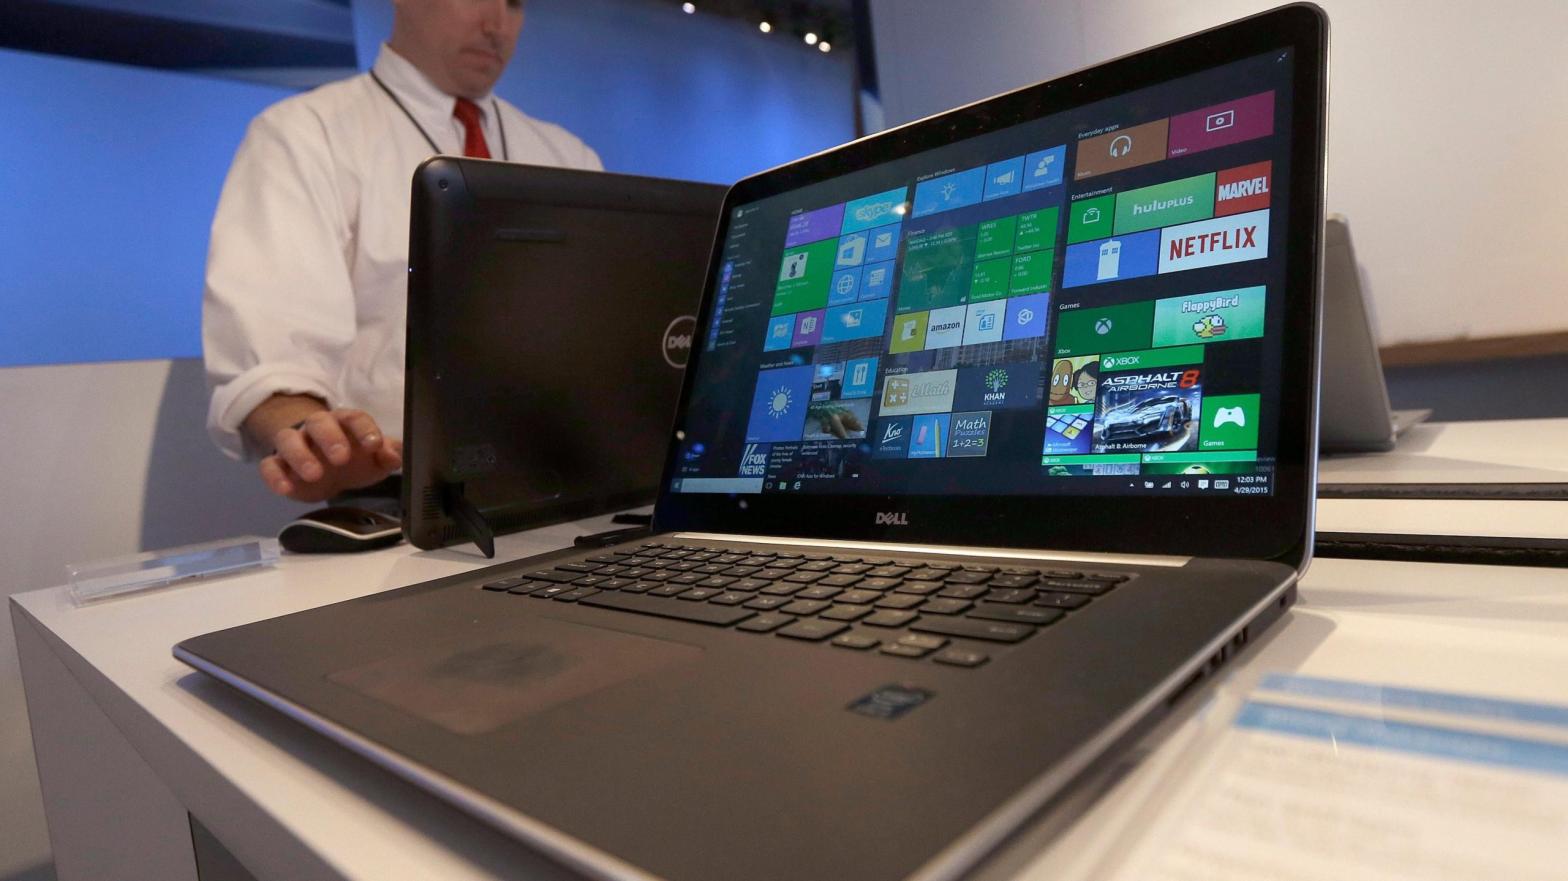 A Dell computer shown at the Microsoft Build conference in San Francisco in 2015. (Photo: Jeff Chiu, AP)